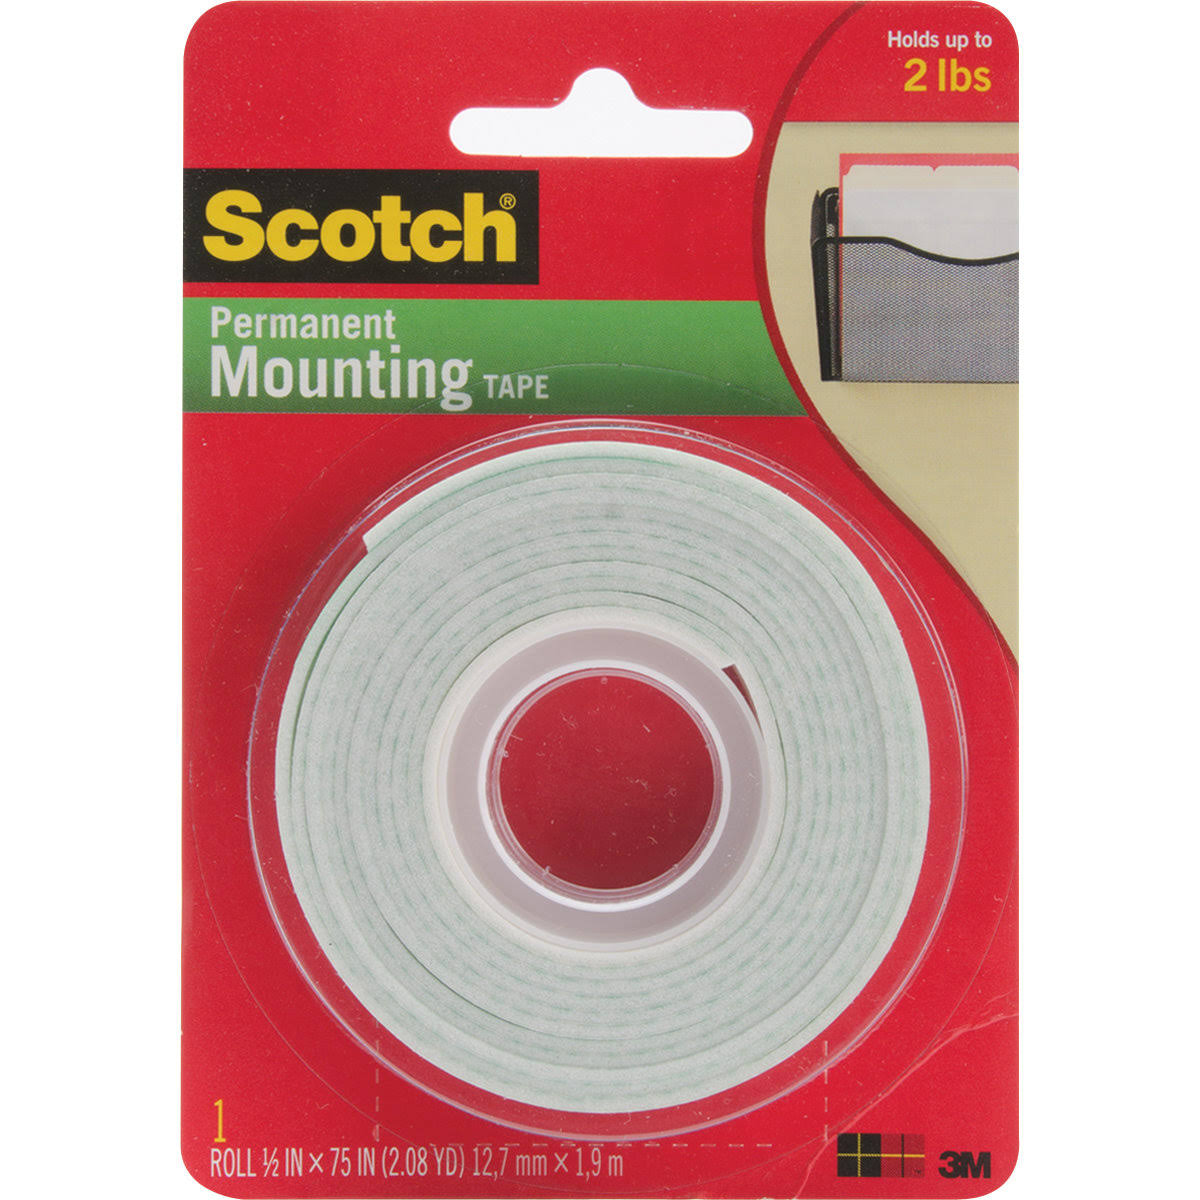 Scotch Mounting Tape - 5in x 75in